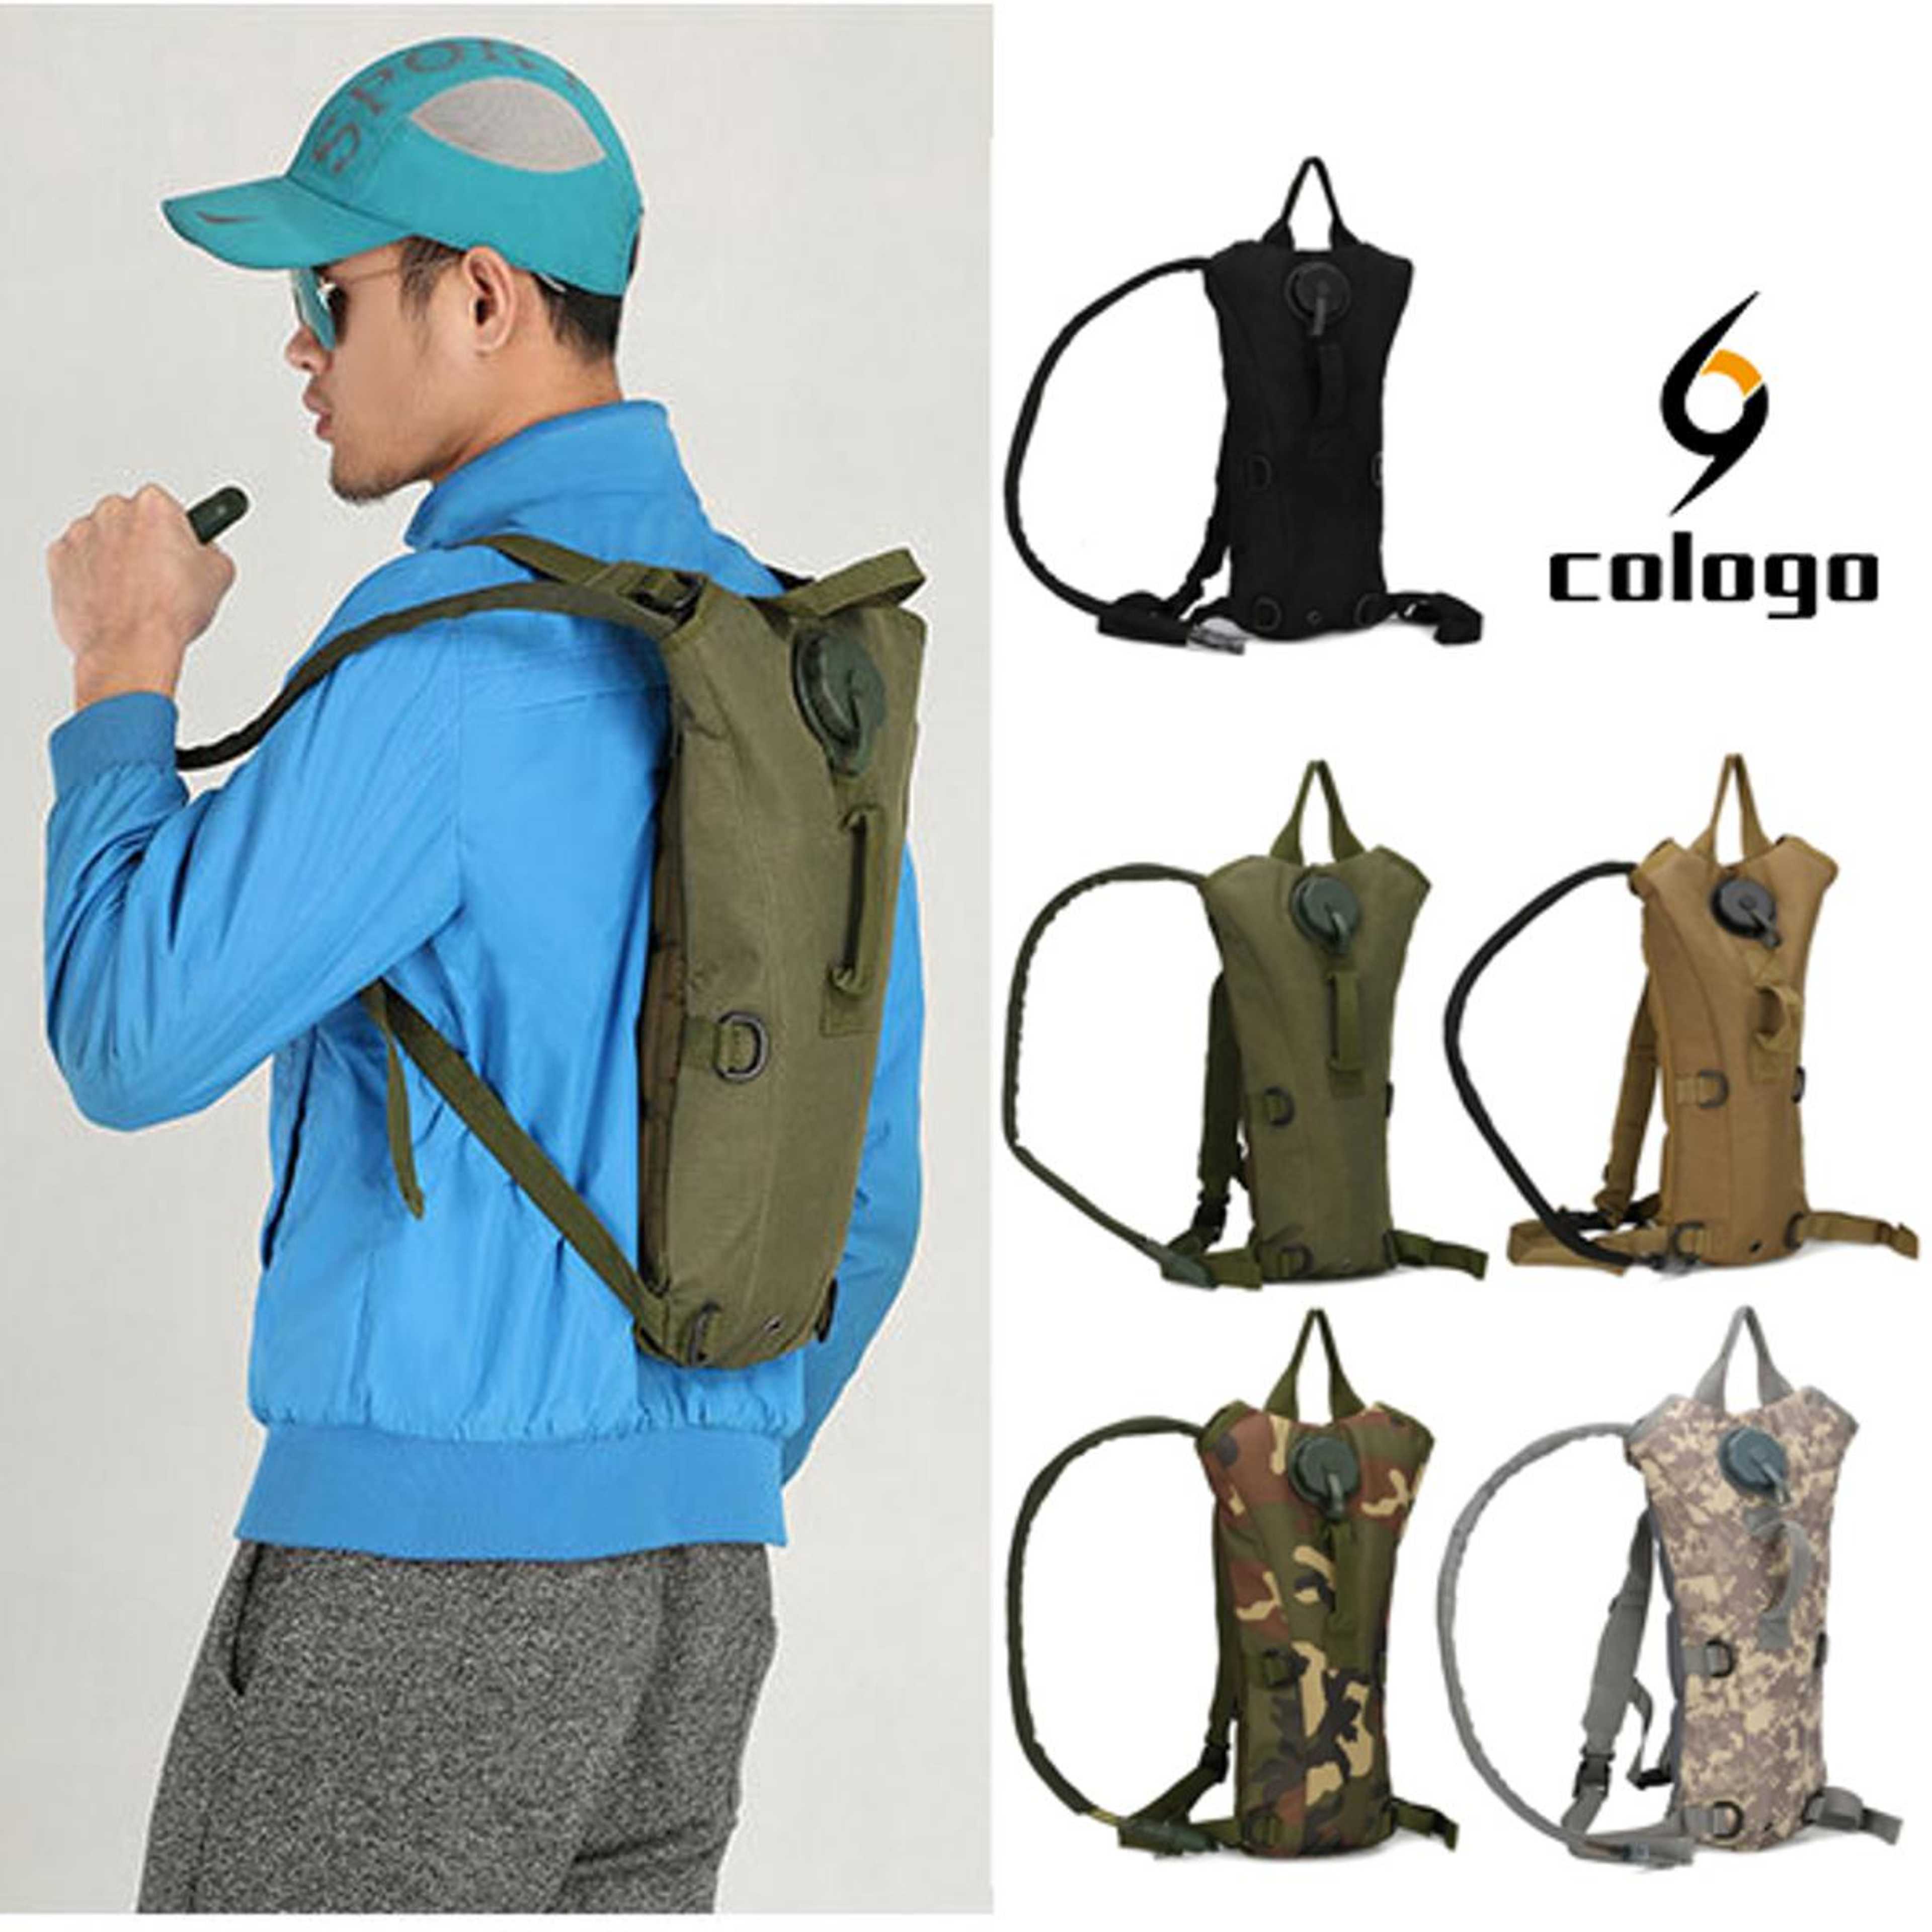 Hydratiion Water Backpack, best quality for travel Outdoor Camping Camelback, Nyllon Camel Water Bladdeer Bag